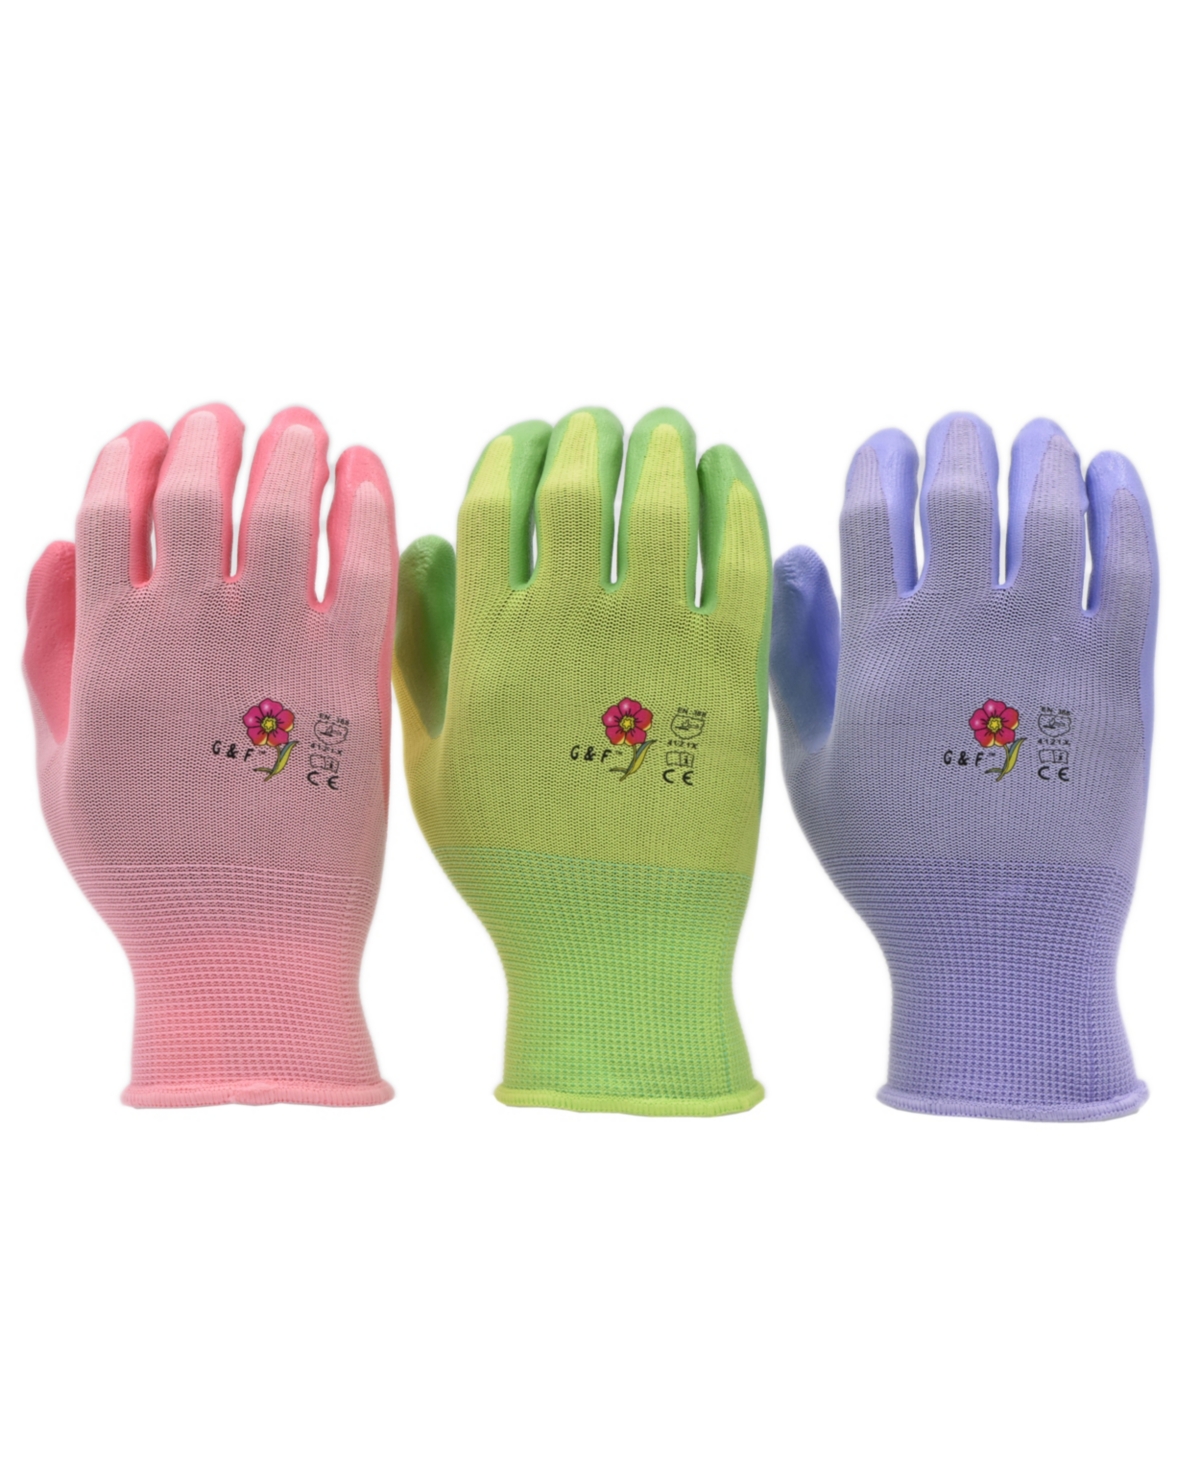 Nitrile Coated Women's Garden Gloves, 6 Pairs - Assorted Pre-Packed